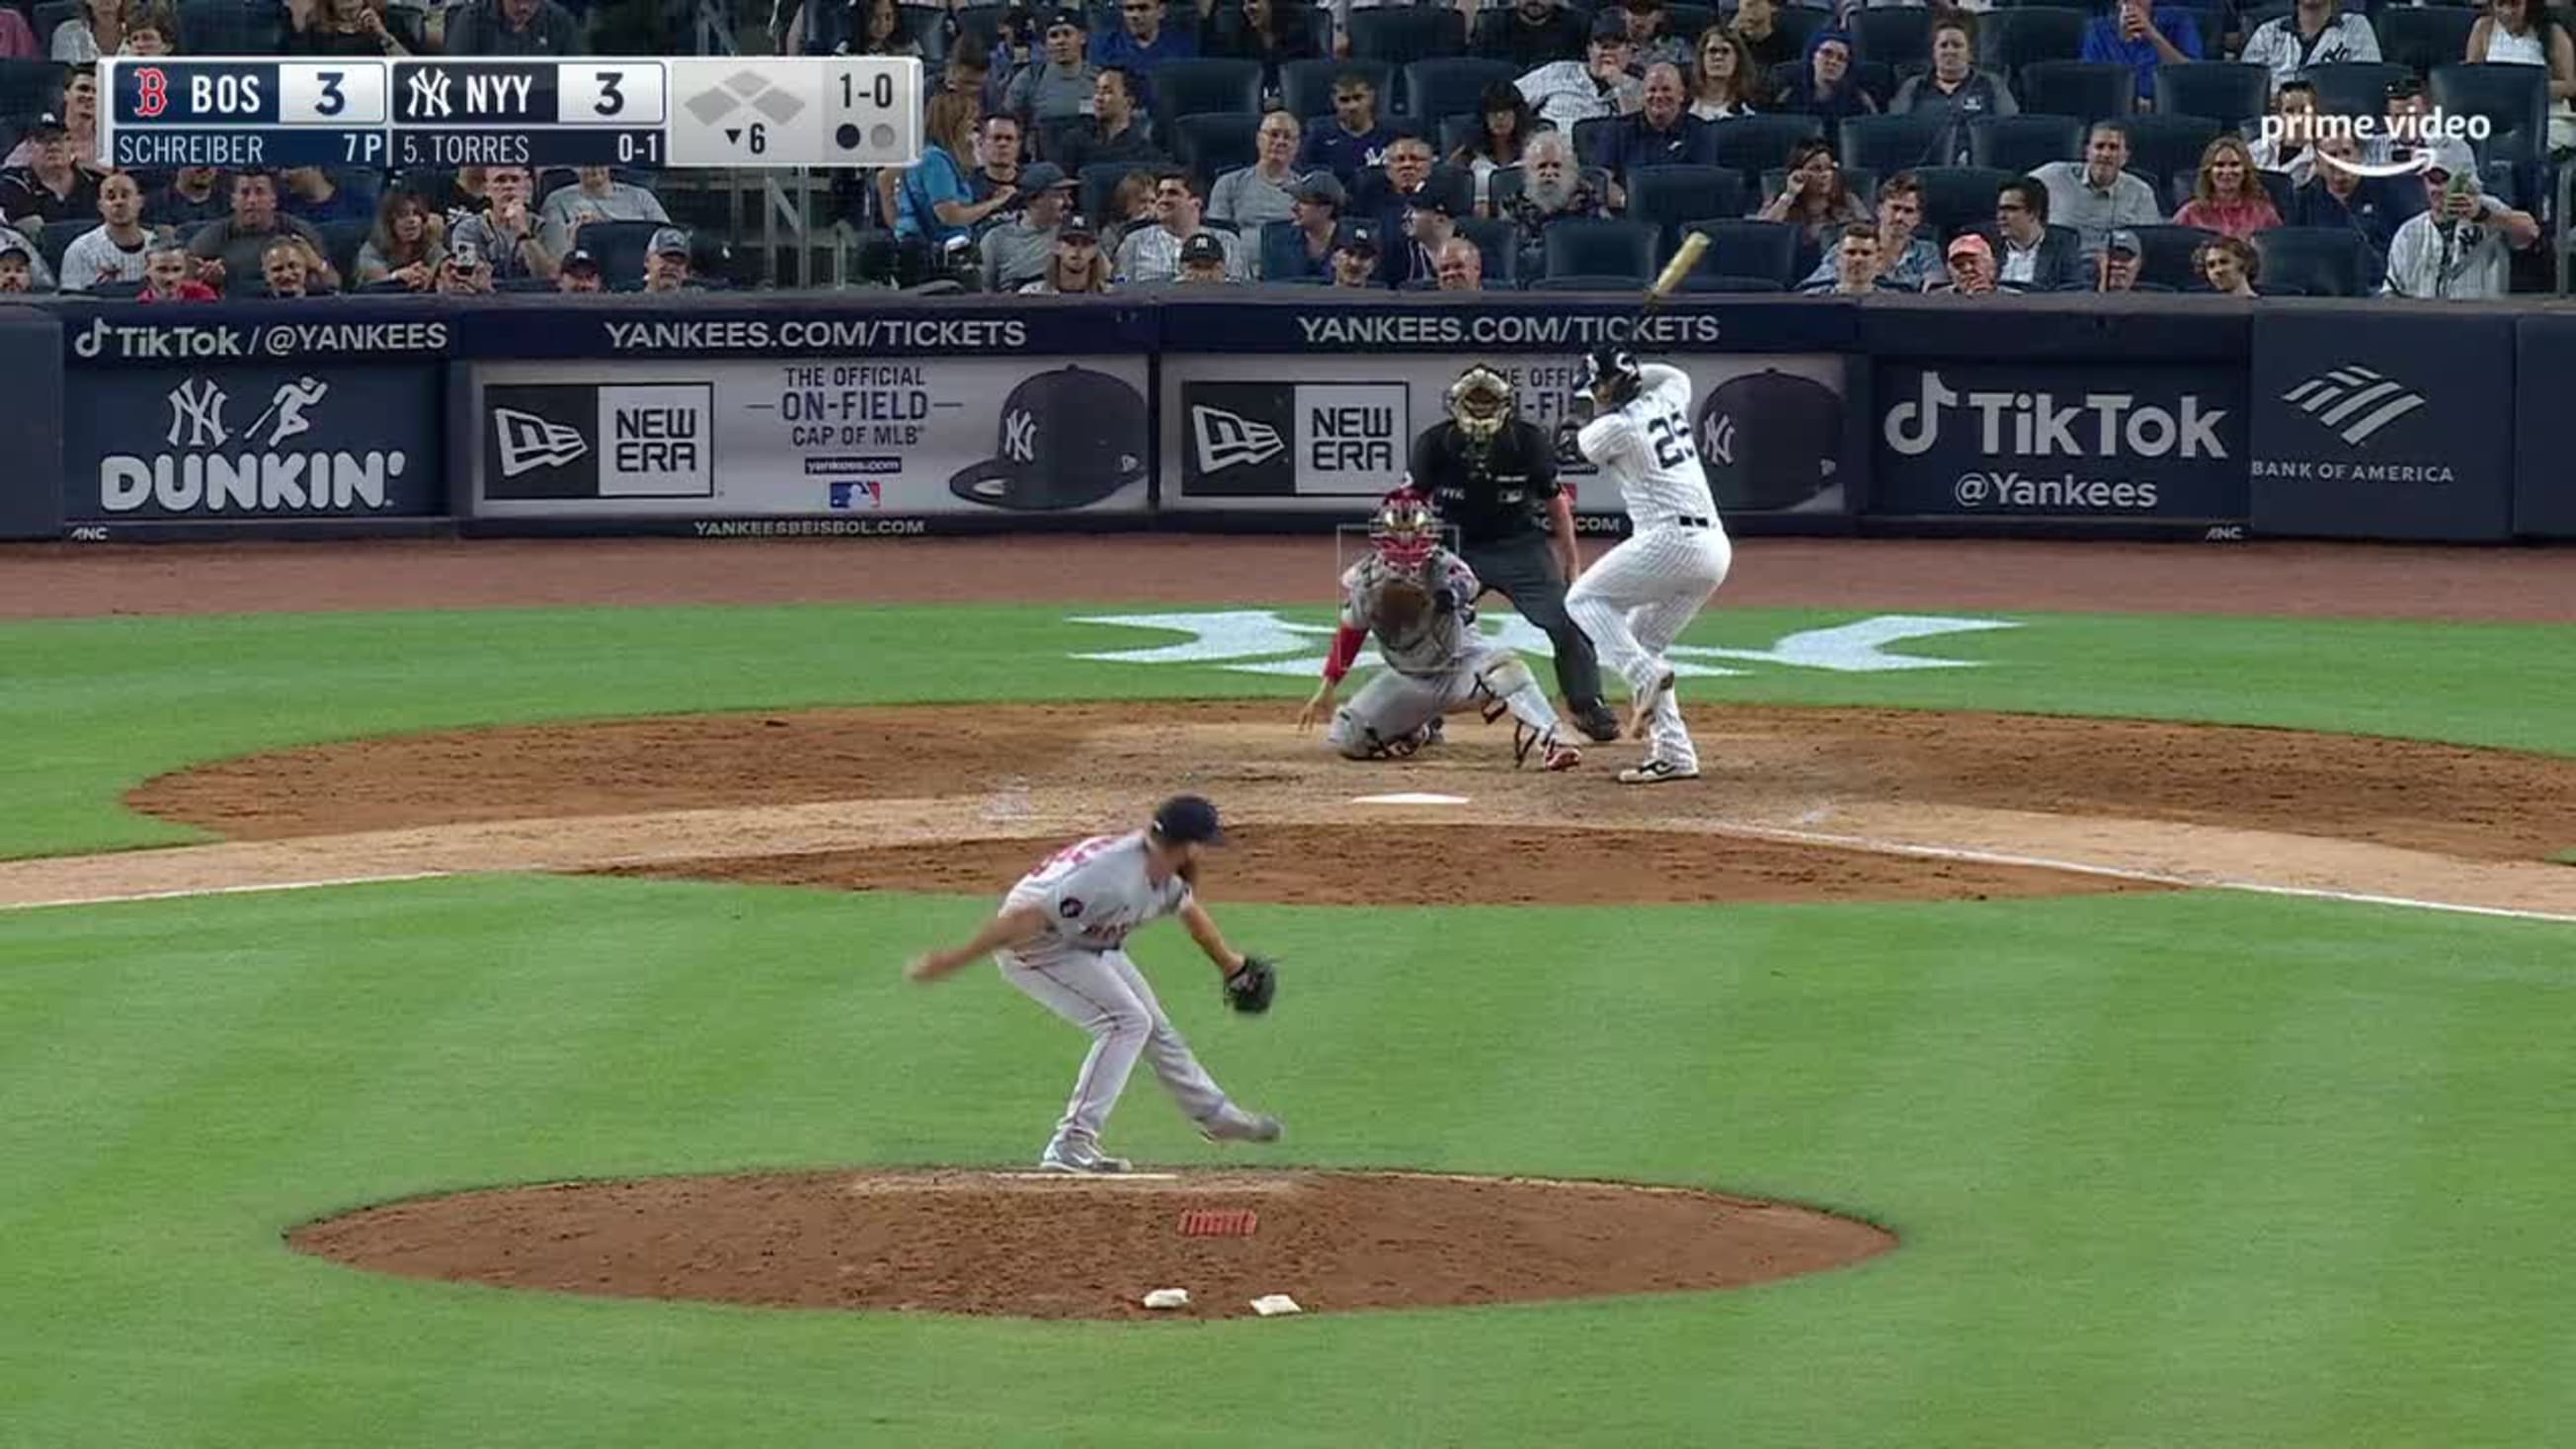 Gleyber Torres grounds out, first baseman Bobby Dalbec to pitcher